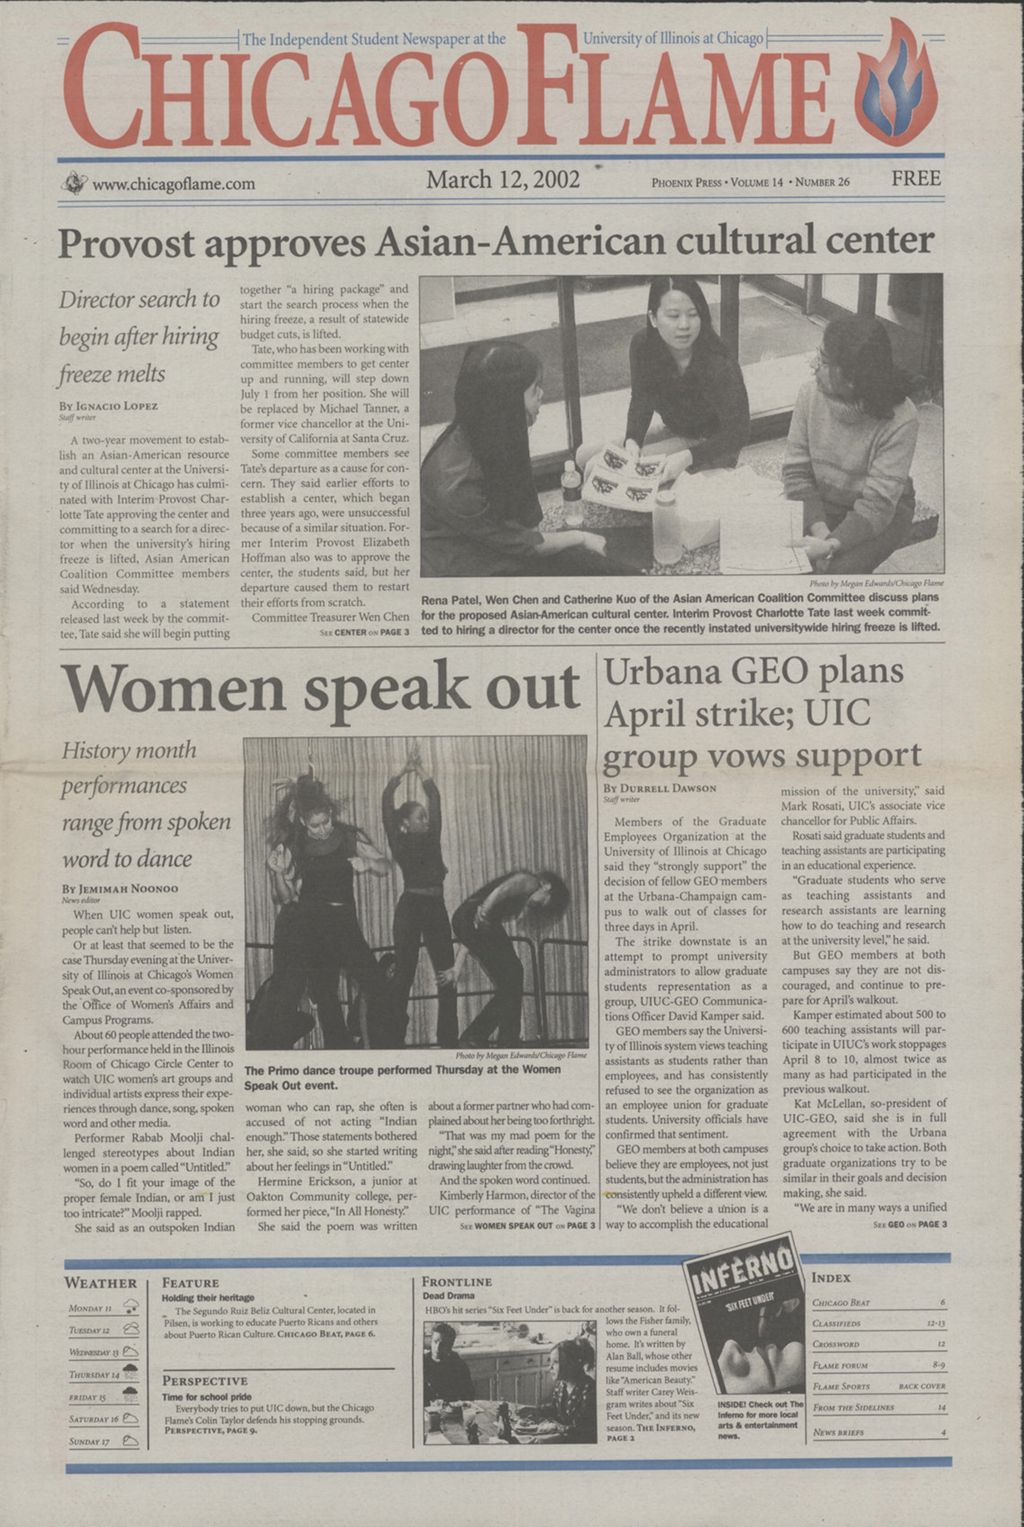 Miniature of Chicago Flame (March 12, 2002)